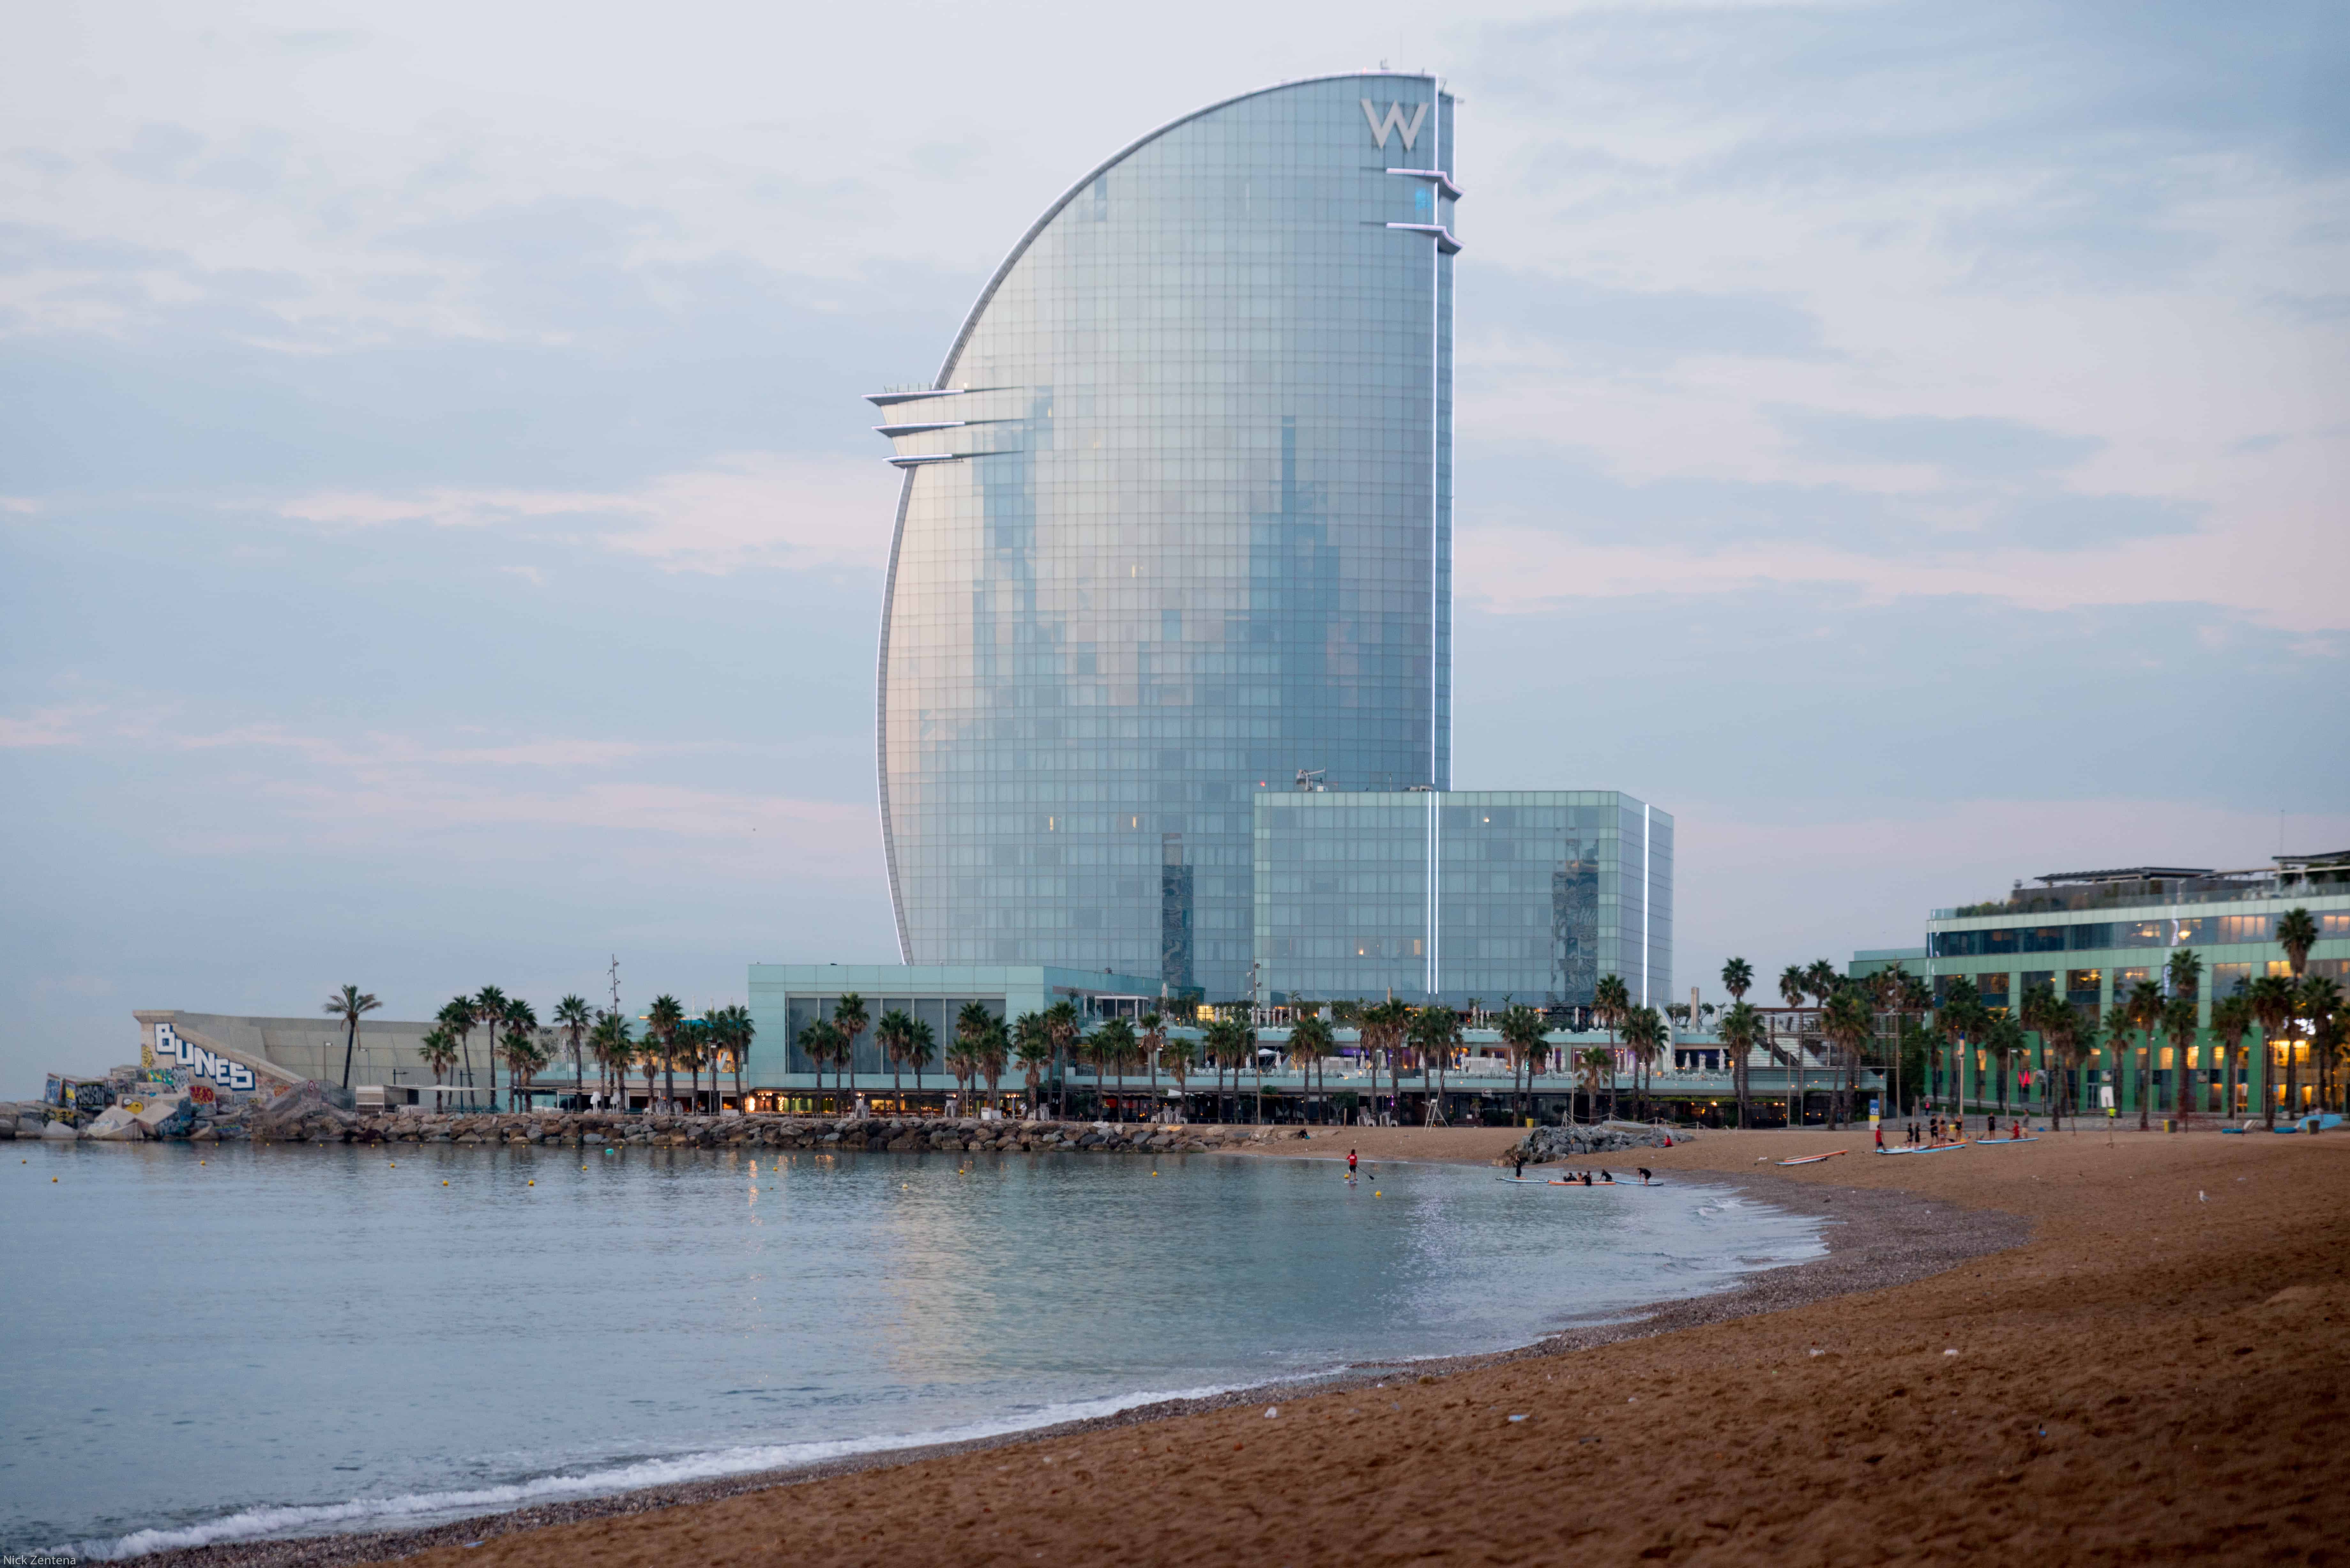 Hotel W Barcelona and a lonely empty beach